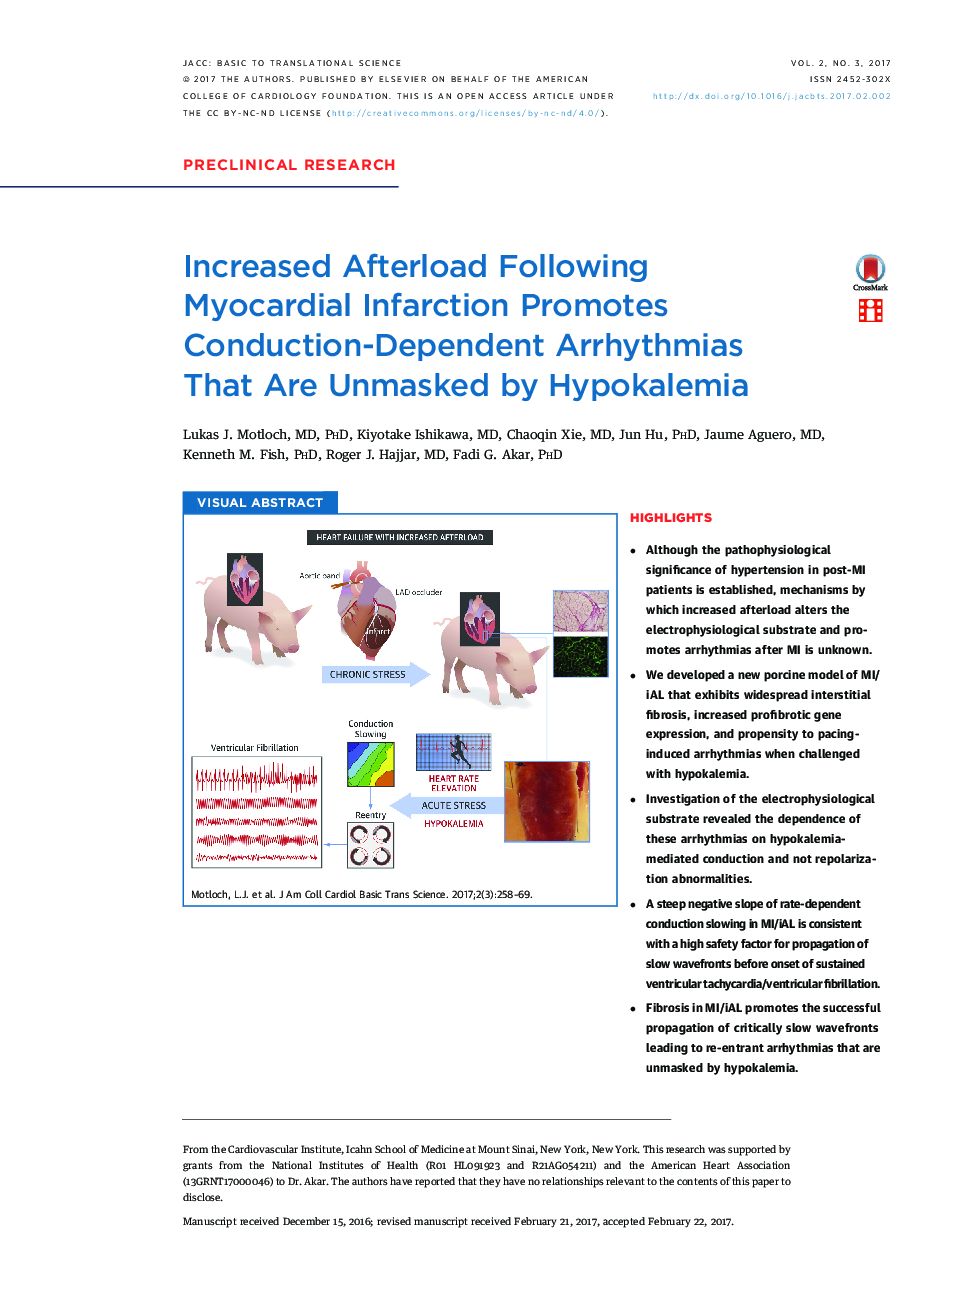 Increased Afterload Following MyocardialÂ Infarction Promotes Conduction-Dependent Arrhythmias ThatÂ Are Unmasked by Hypokalemia